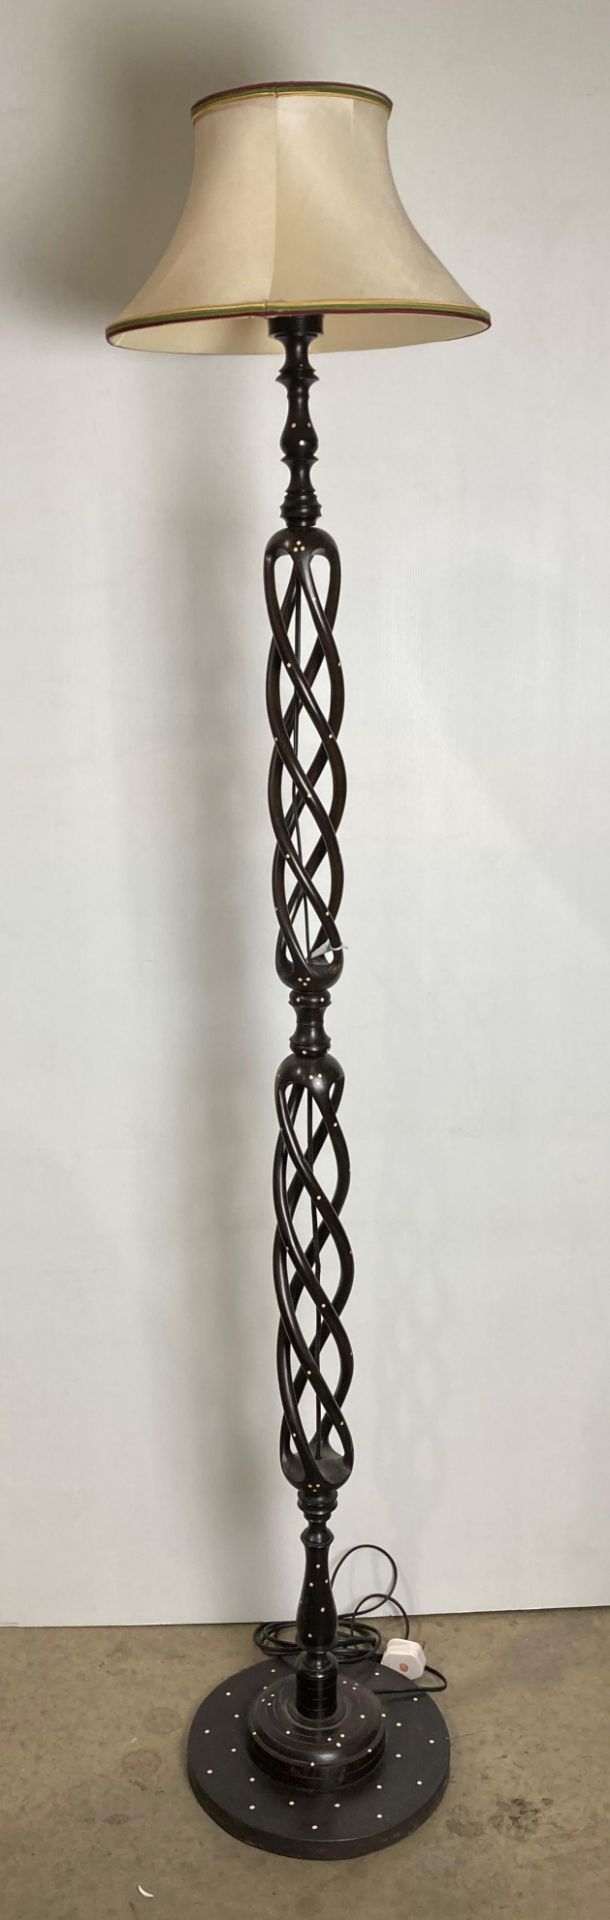 Beautiful ebony wooden turned standard lamp with four-stem twisted column inlaid with white spots